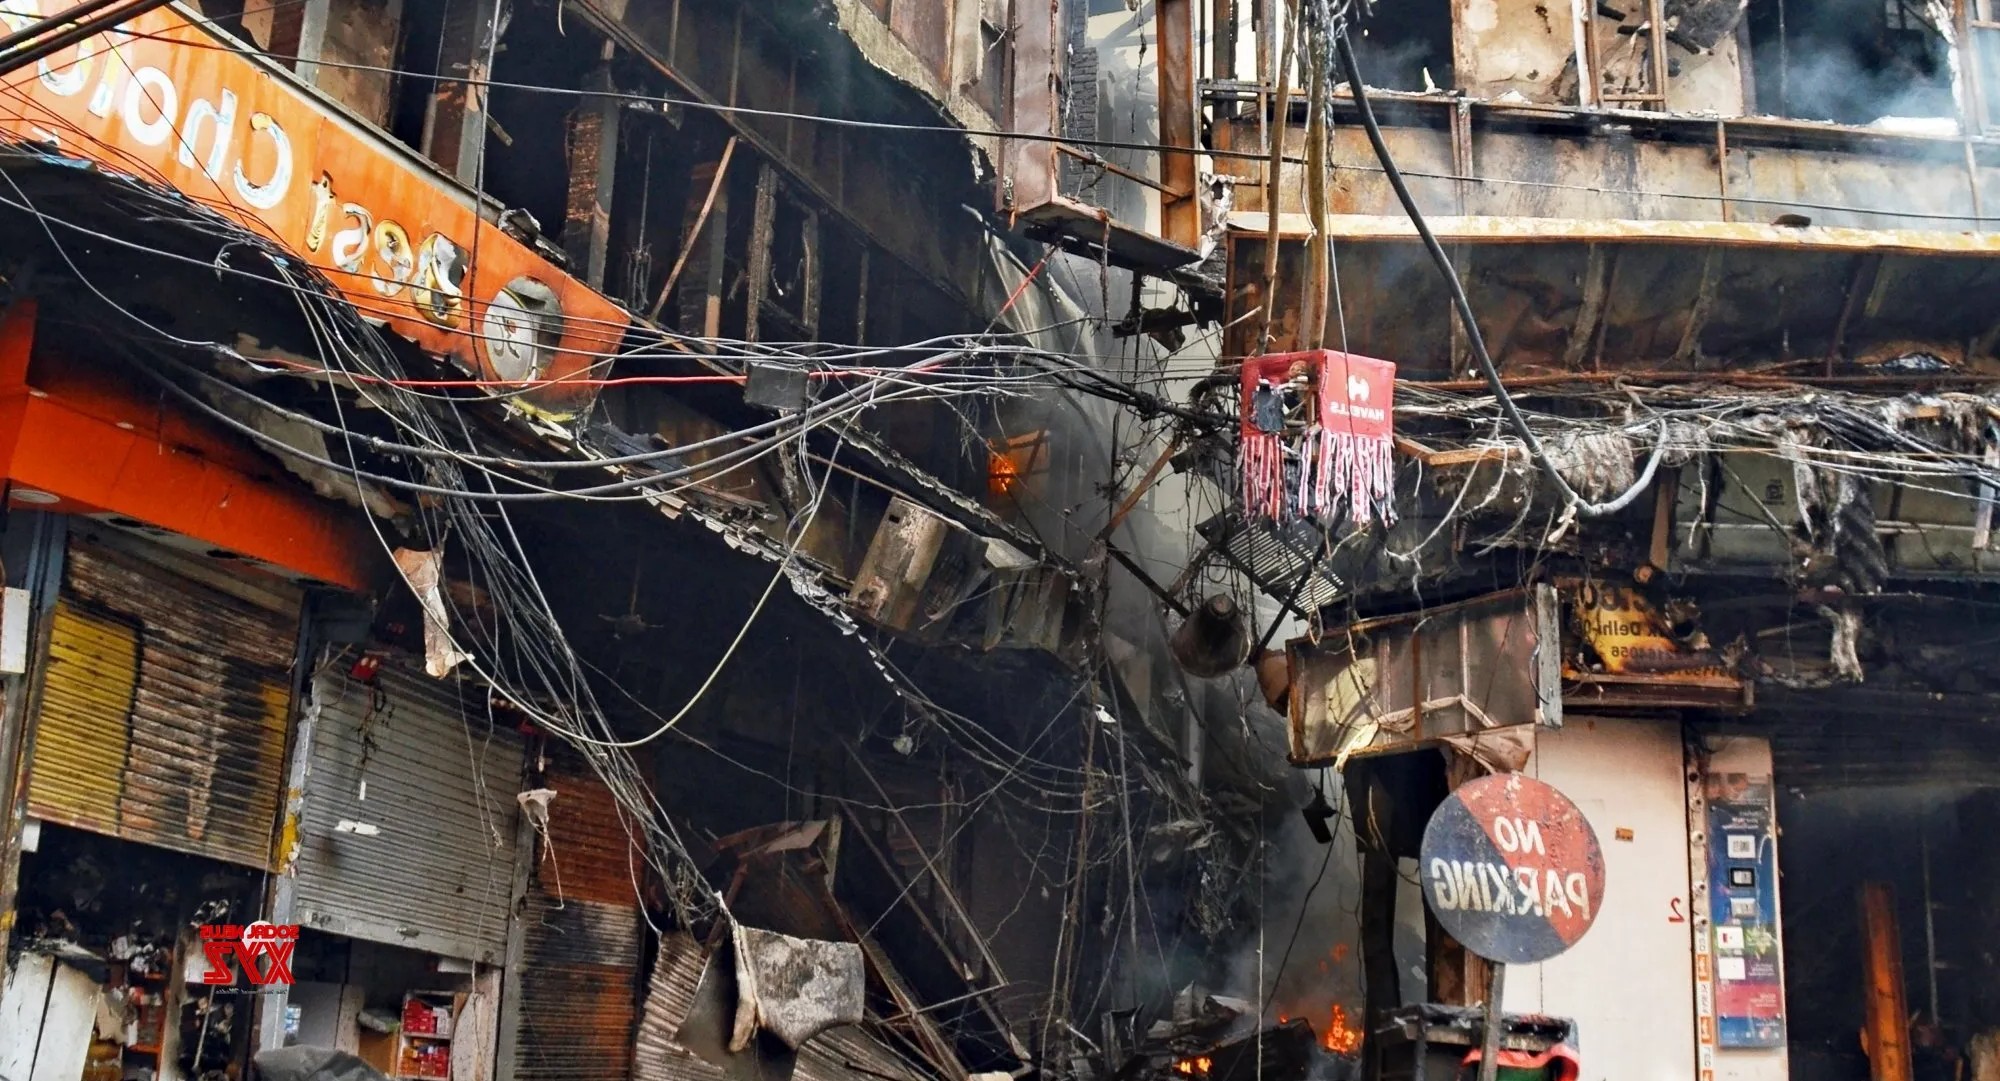 After 24 hours, the fire in Delhi's electronics market is still out of control